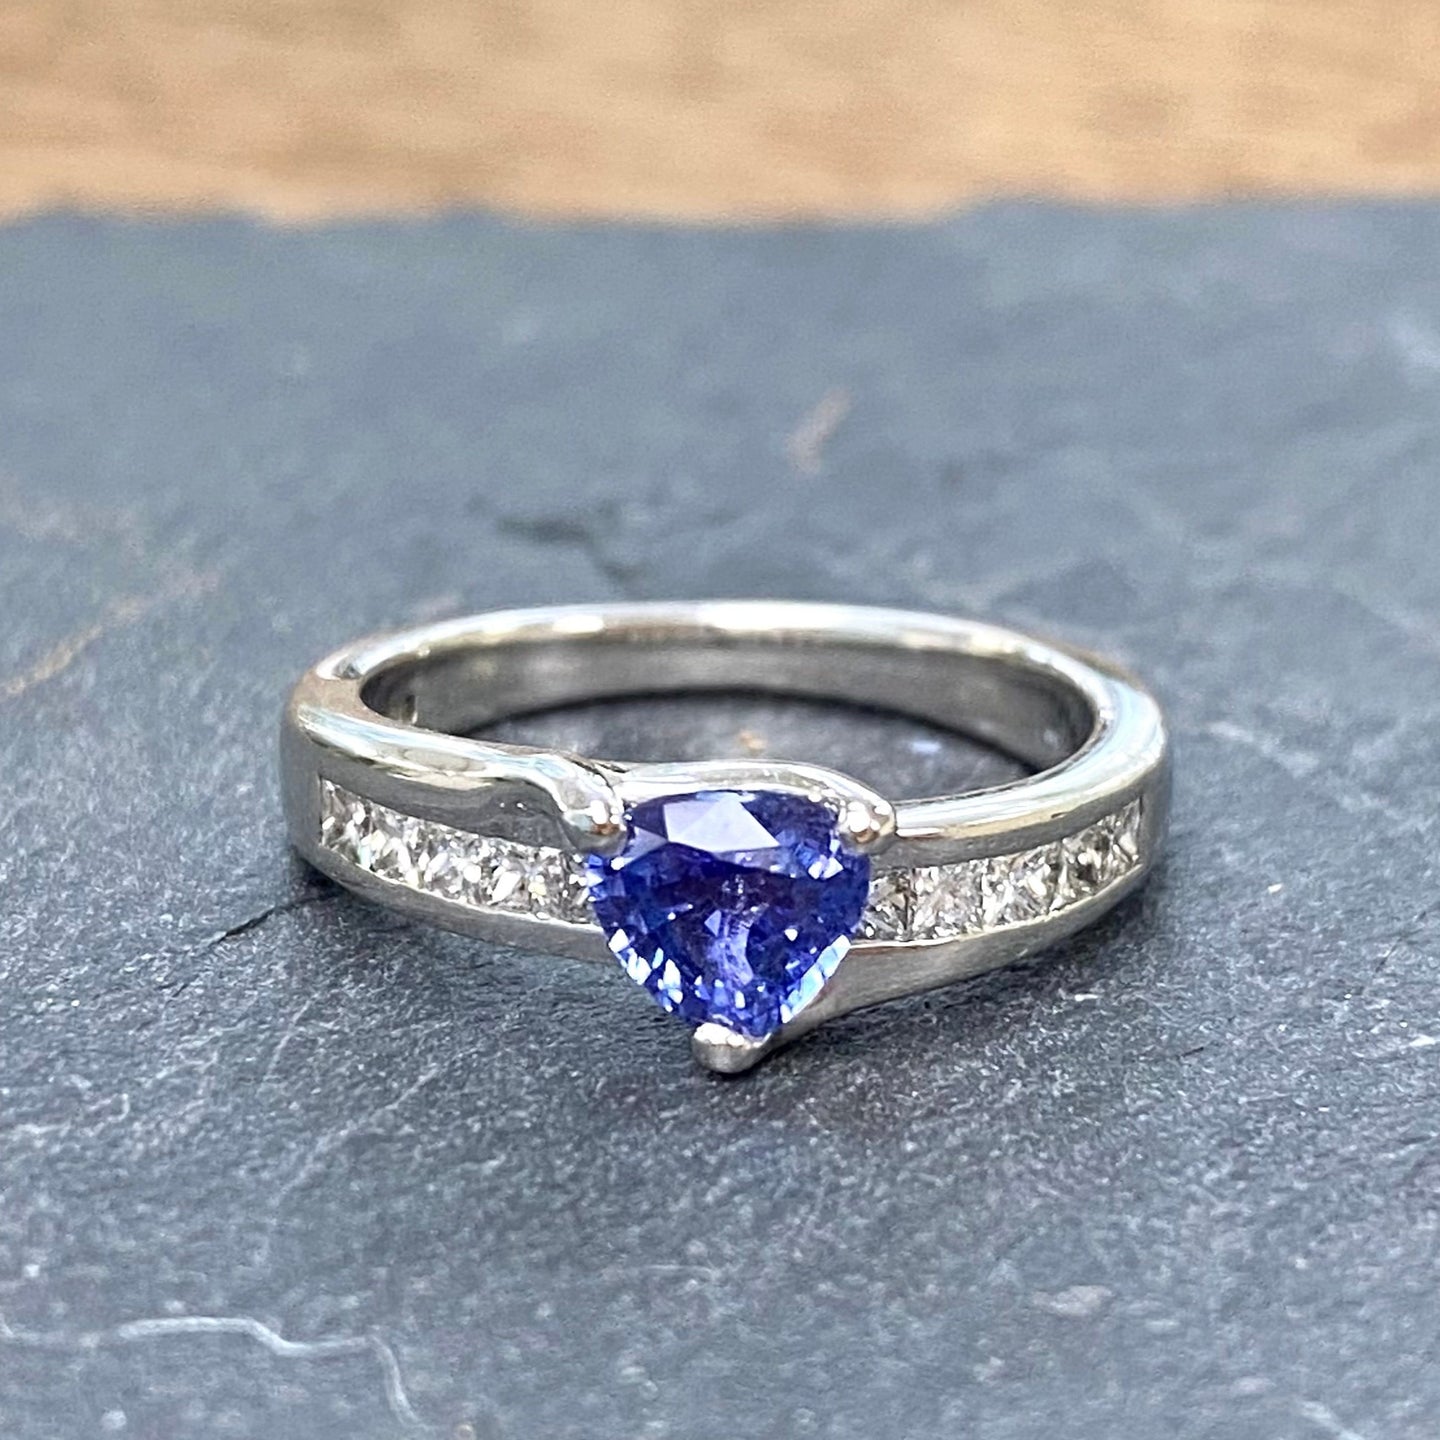 Pre-Loved Platinum Ring with a Trillion Cut Ceylon Sapphire and Diamonds